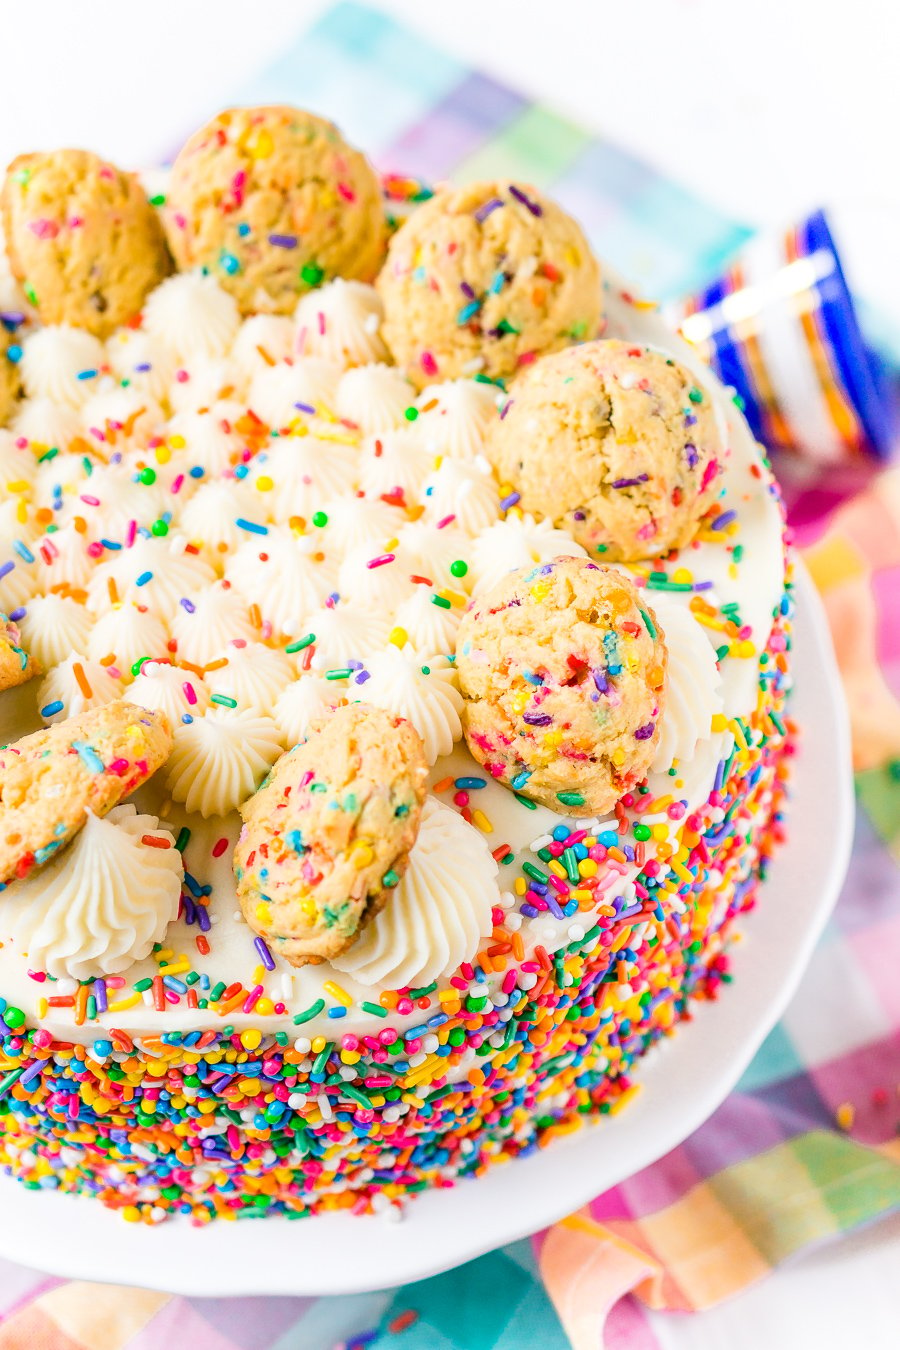 This Funfetti Sugar Cookie Dough cake is an over the top cake made with two layers of white almond cake loaded with sprinkles and a layer of edible sugar cookie dough, then topped with classic vanilla buttercream!